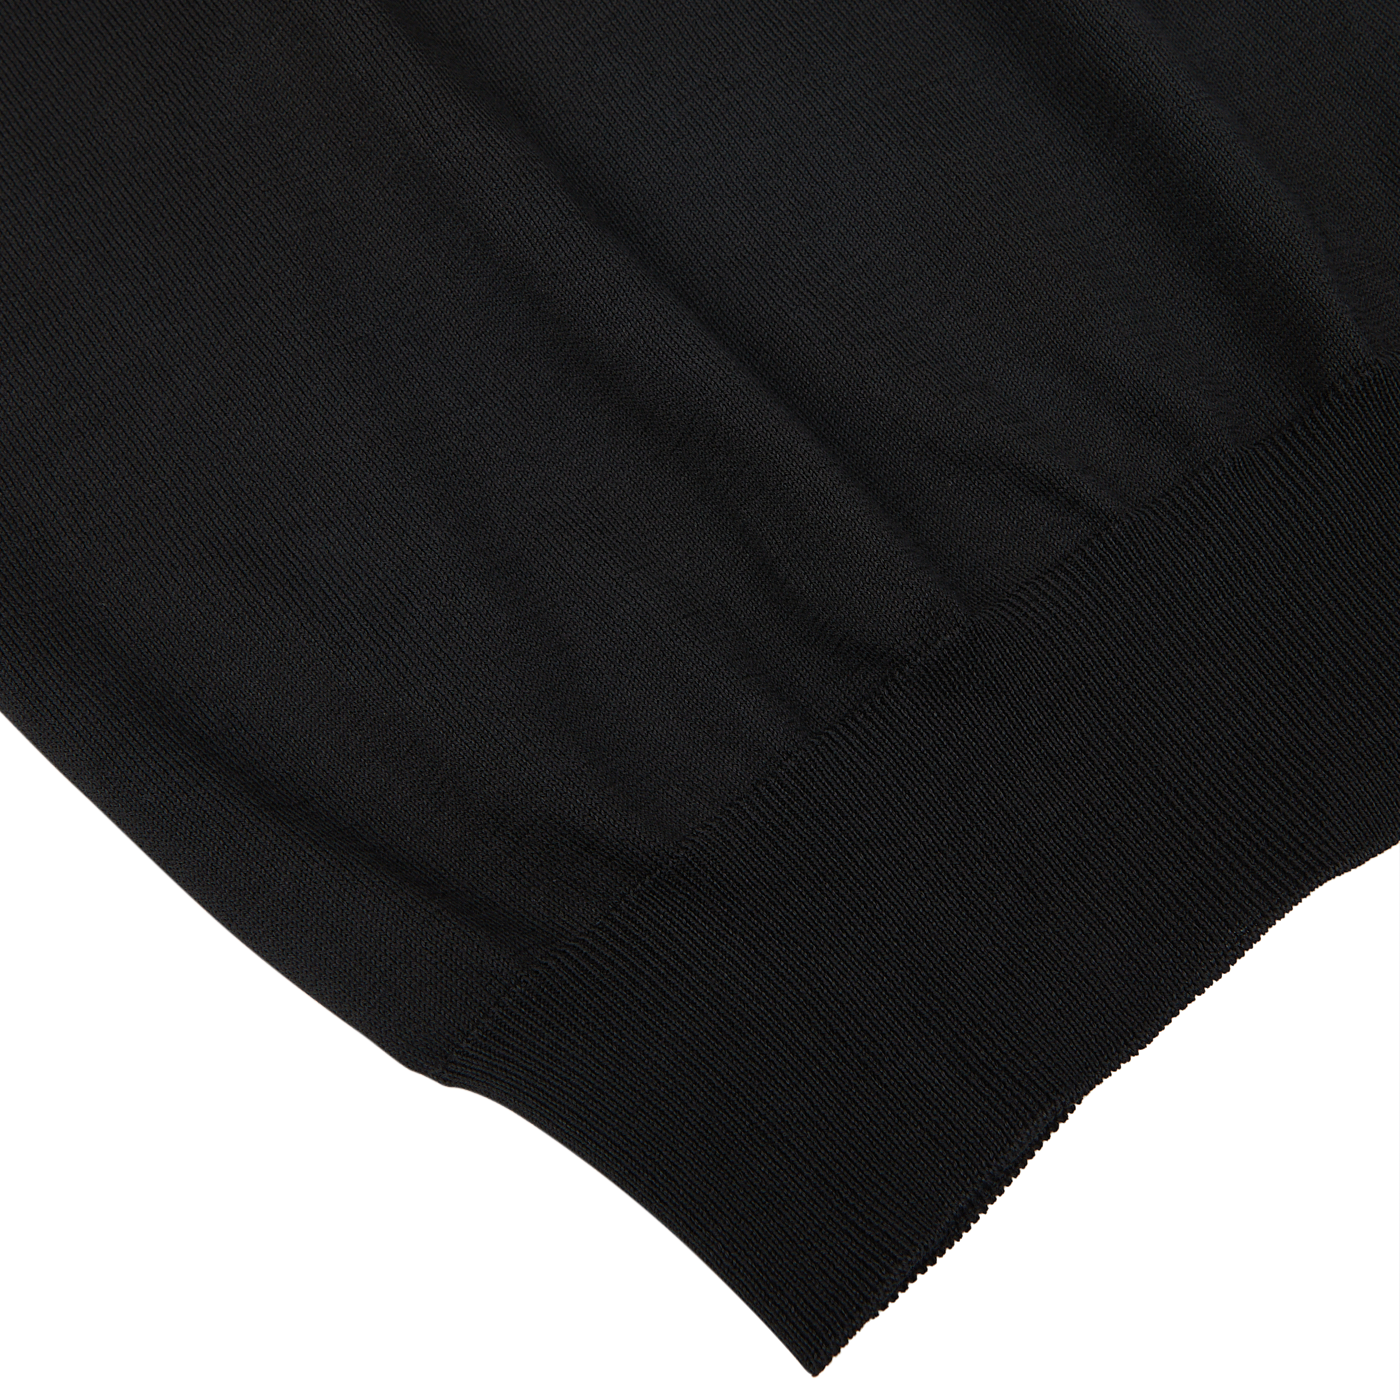 Close-up view of a black Gran Sasso knitted t-shirt with ribbed detailing, displayed on a white background.